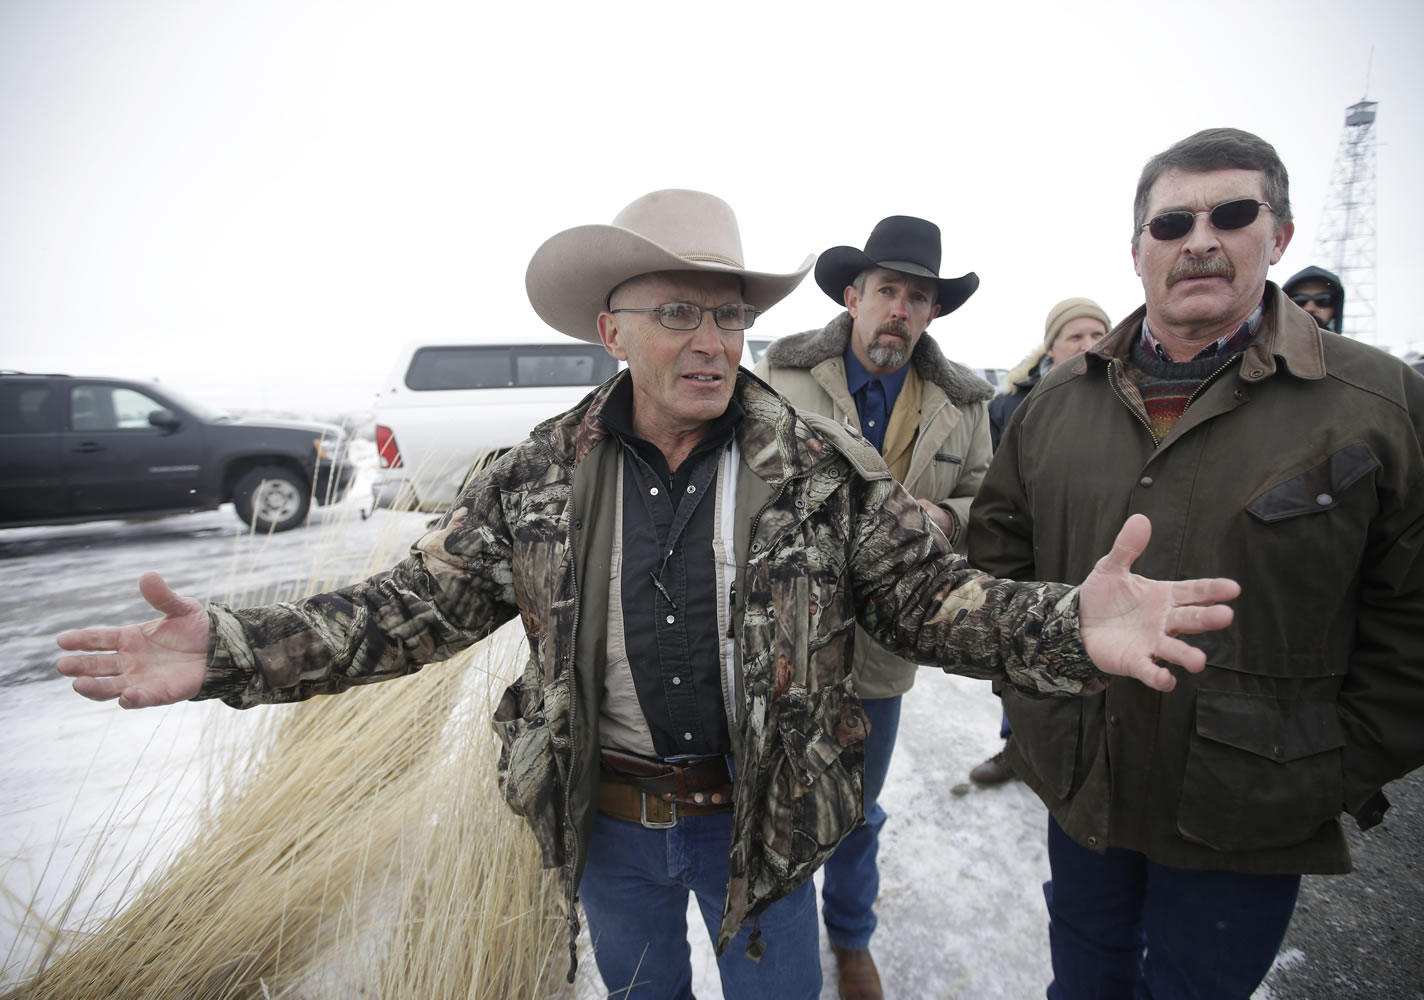 FILE - In this Jan. 9, 2016 file photo, LaVoy Finicum, a rancher from Arizona, speaks to the media after members of an armed group  along with several other organizations arrive at the at the Malheur National Wildlife Refuge near Burns, Ore.  The FBI and Oregon State Police arrested the leaders of an armed group that has occupied a national wildlife refuge for the past three weeks during a traffic stop that prompted gunfire  and one death  along a highway through the frozen high country. The Oregonian reported that  Finicum was the person killed, citing the man's daughter.